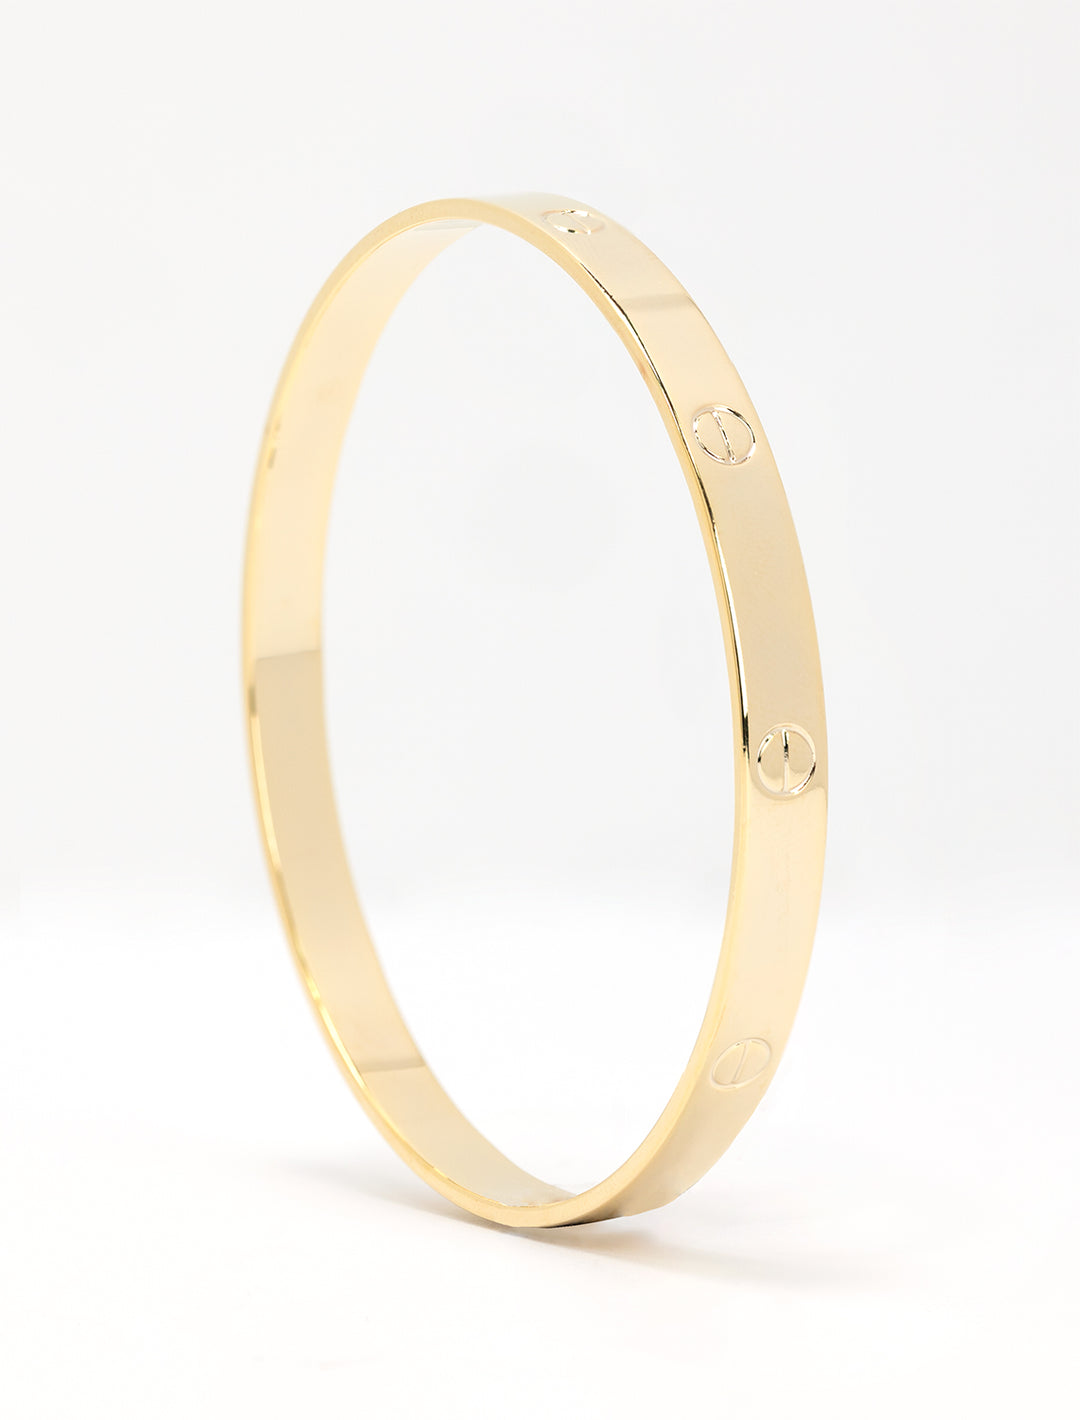 Close-up view of AV Max gold screw accent bangle